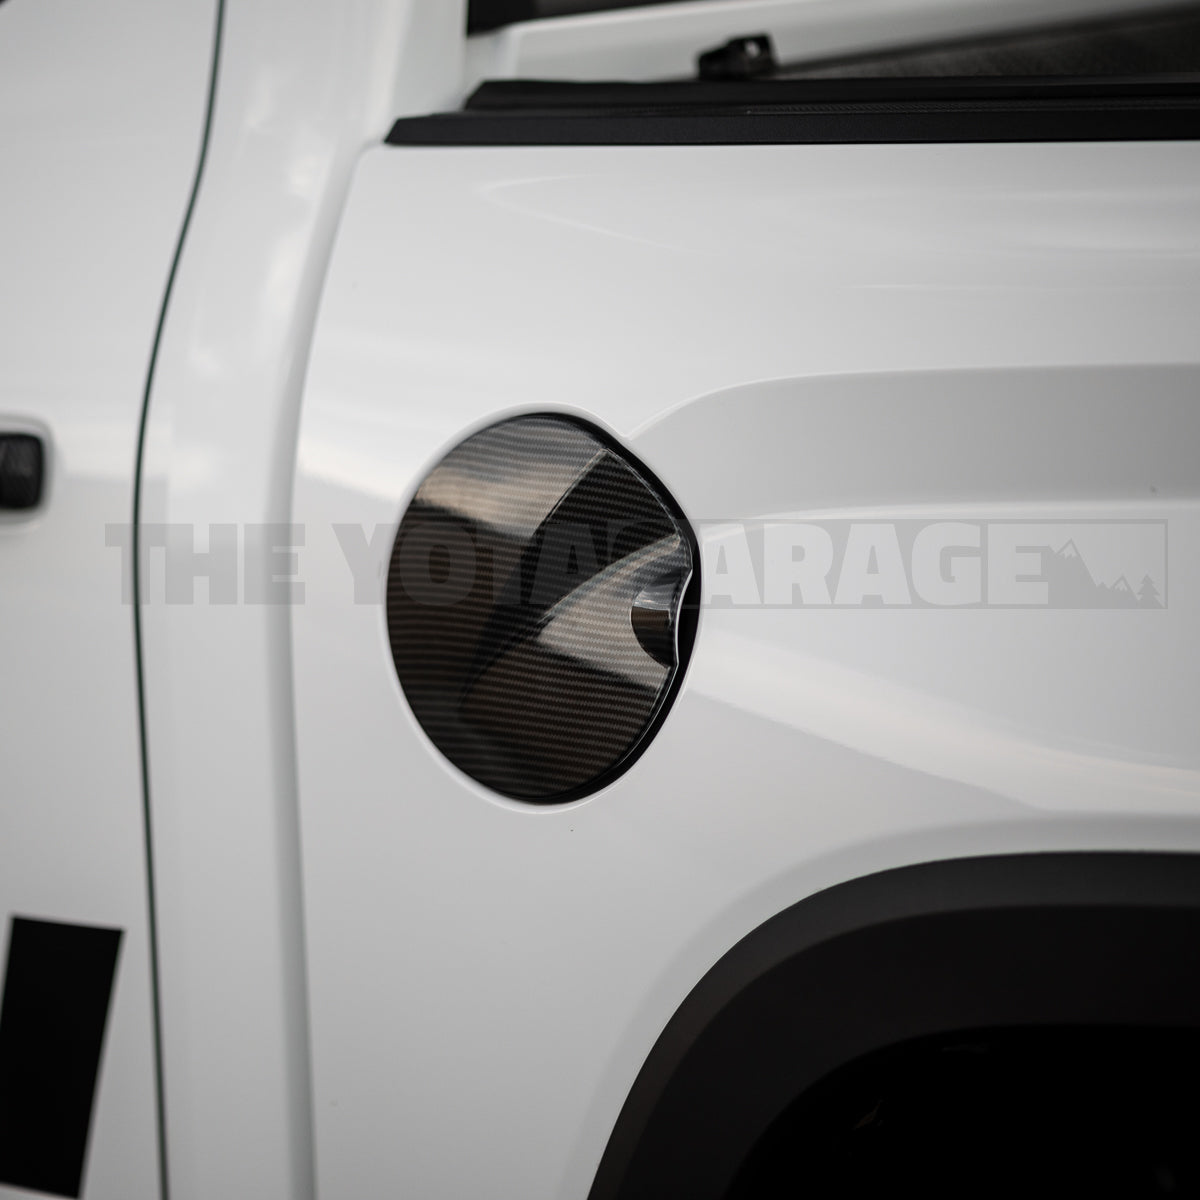 2022+ Toyota Tundra Exterior Parts & Accessories – TheYotaGarage